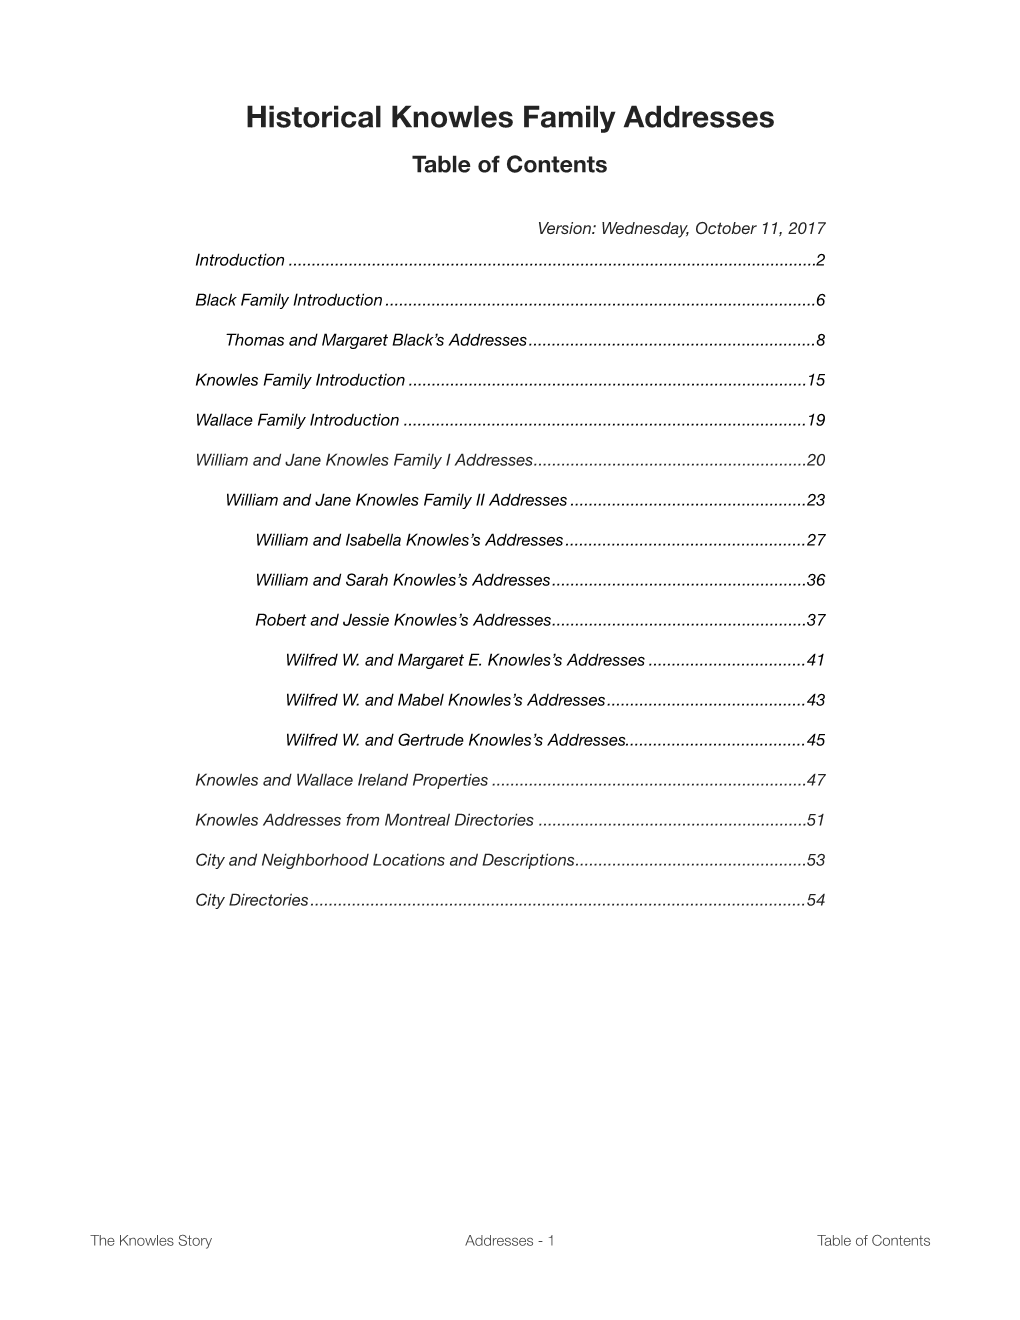 Historical Knowles Family Addresses Table of Contents